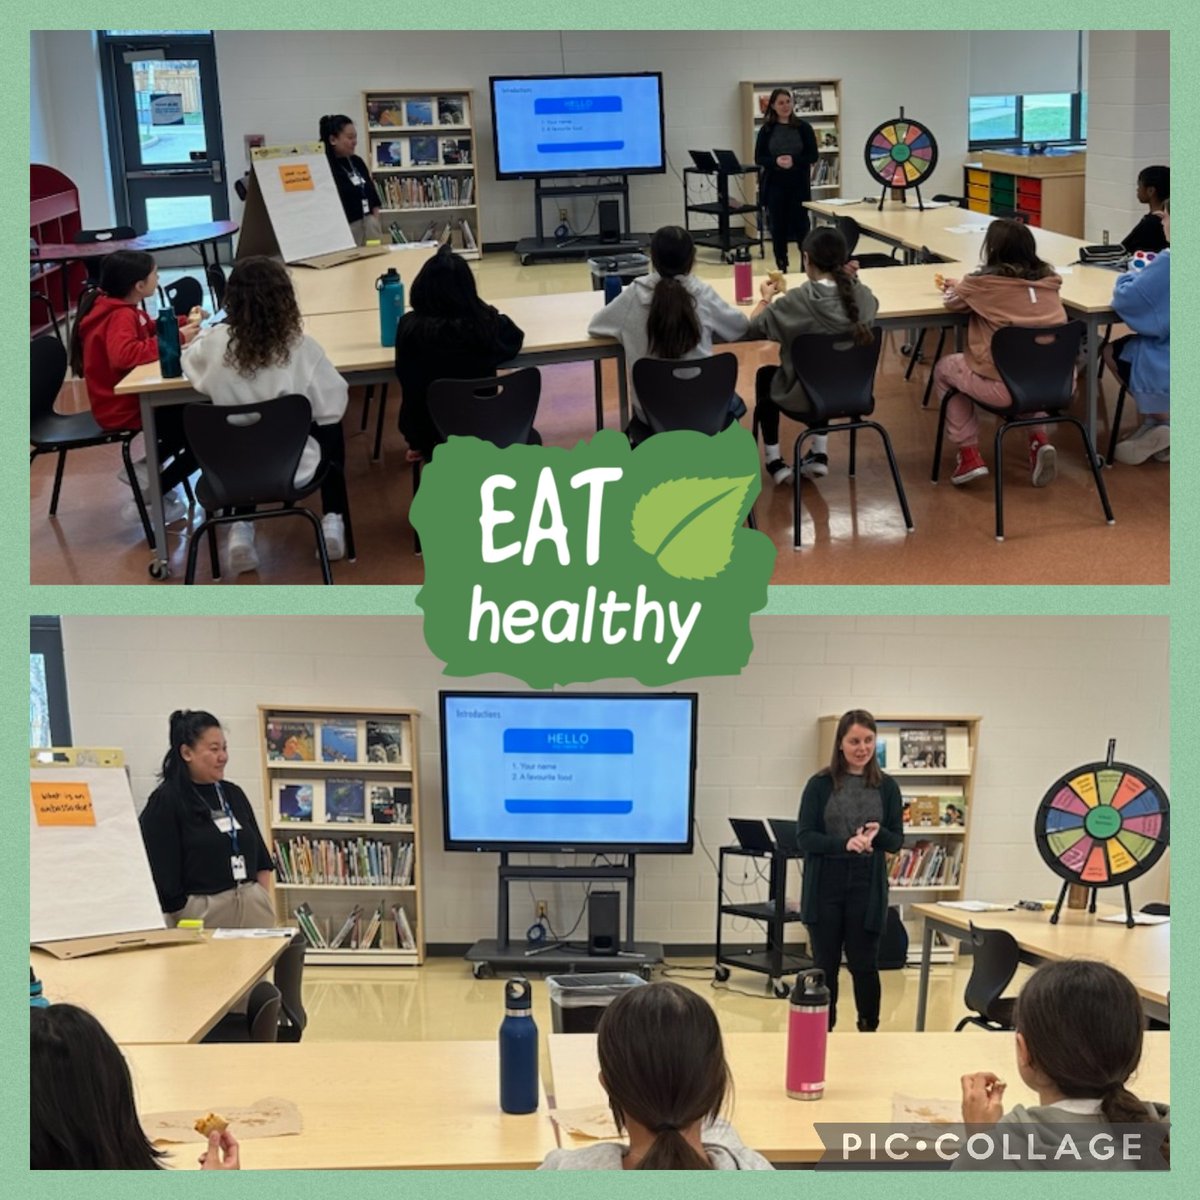 Thank-you to YRPH @YorkRegionGovt for your presentation to our student health ambassadors! Bringing health & wellness to our school community! @laurasawicky